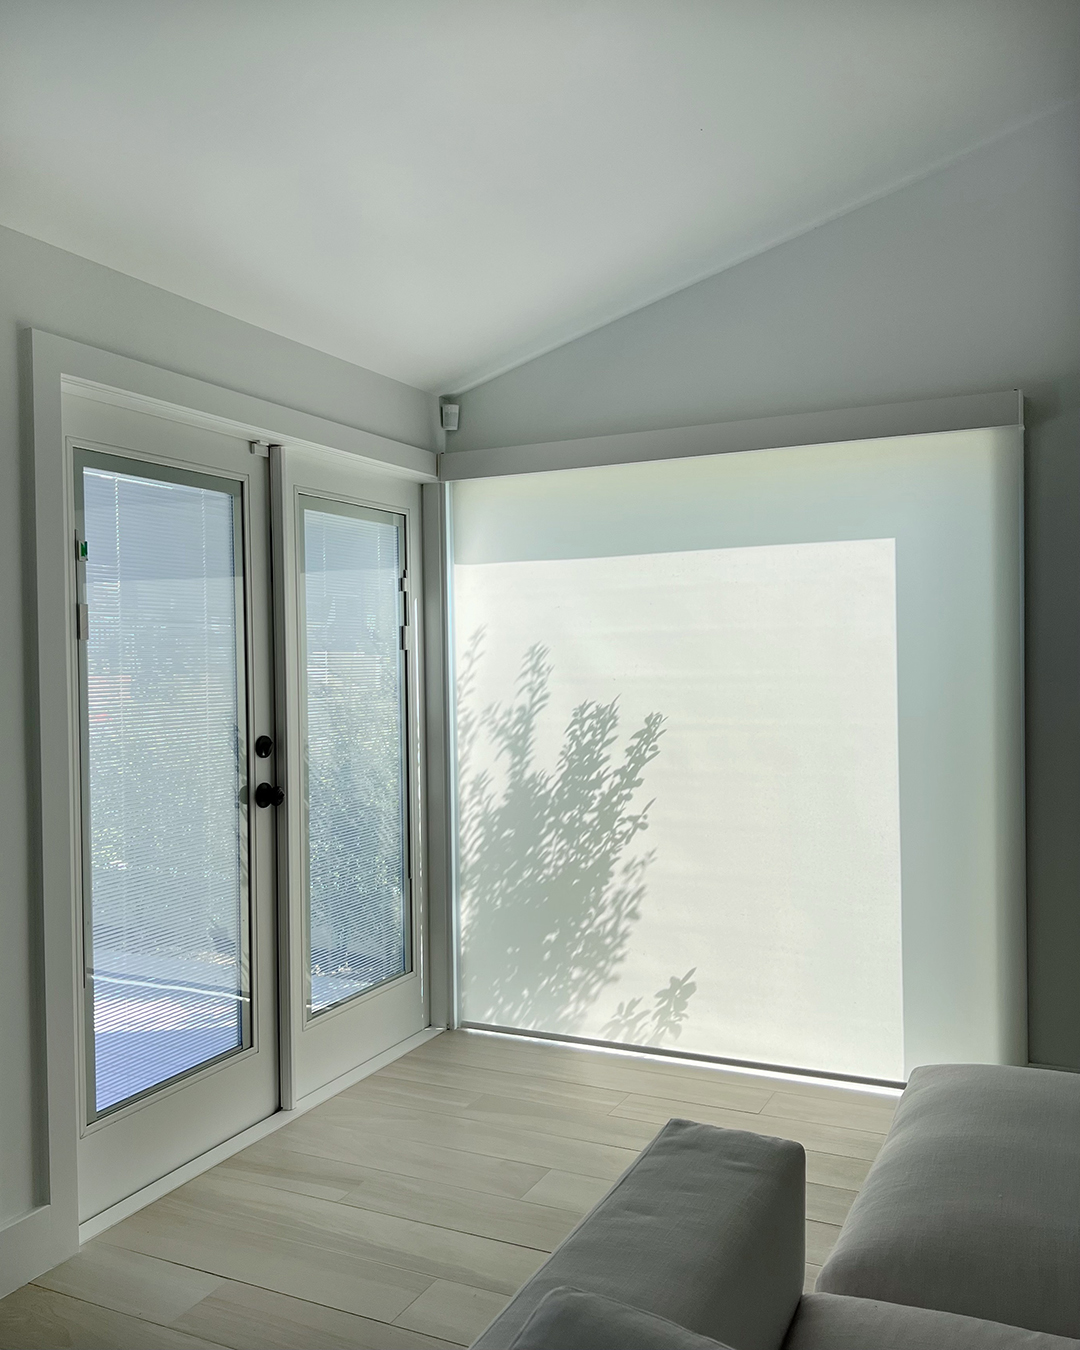 #1 Motorized Window Shades Manufacturers in Orange County, CA